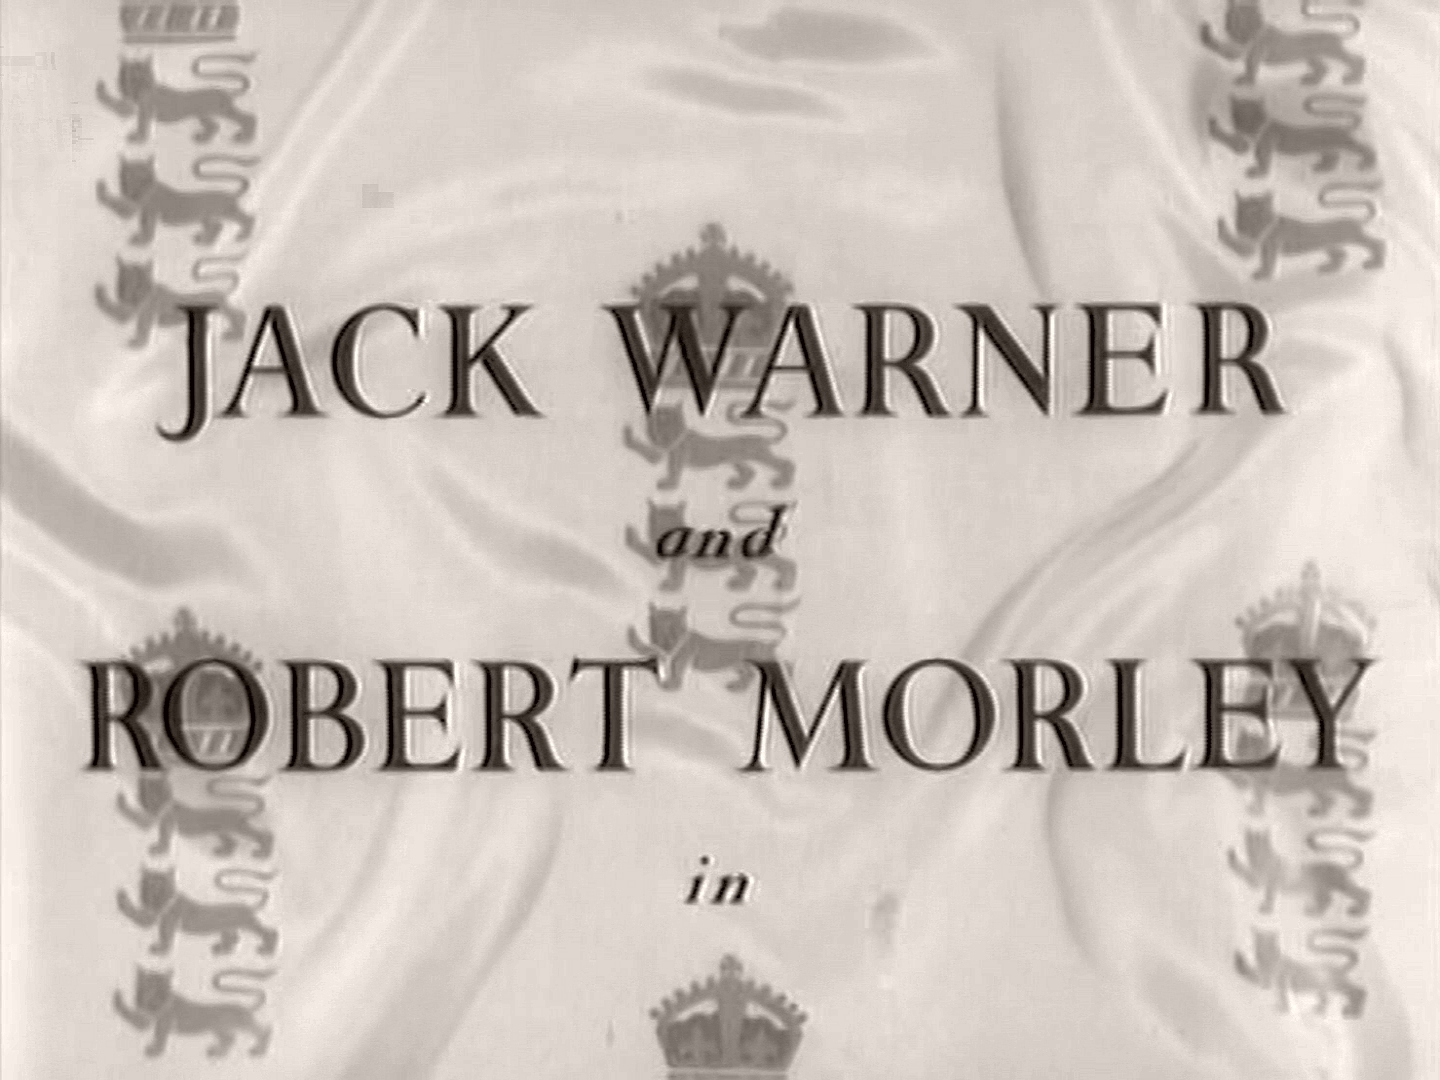 Main title from The Final Test (1953) (3).  Jack Warner and Robert Morley in